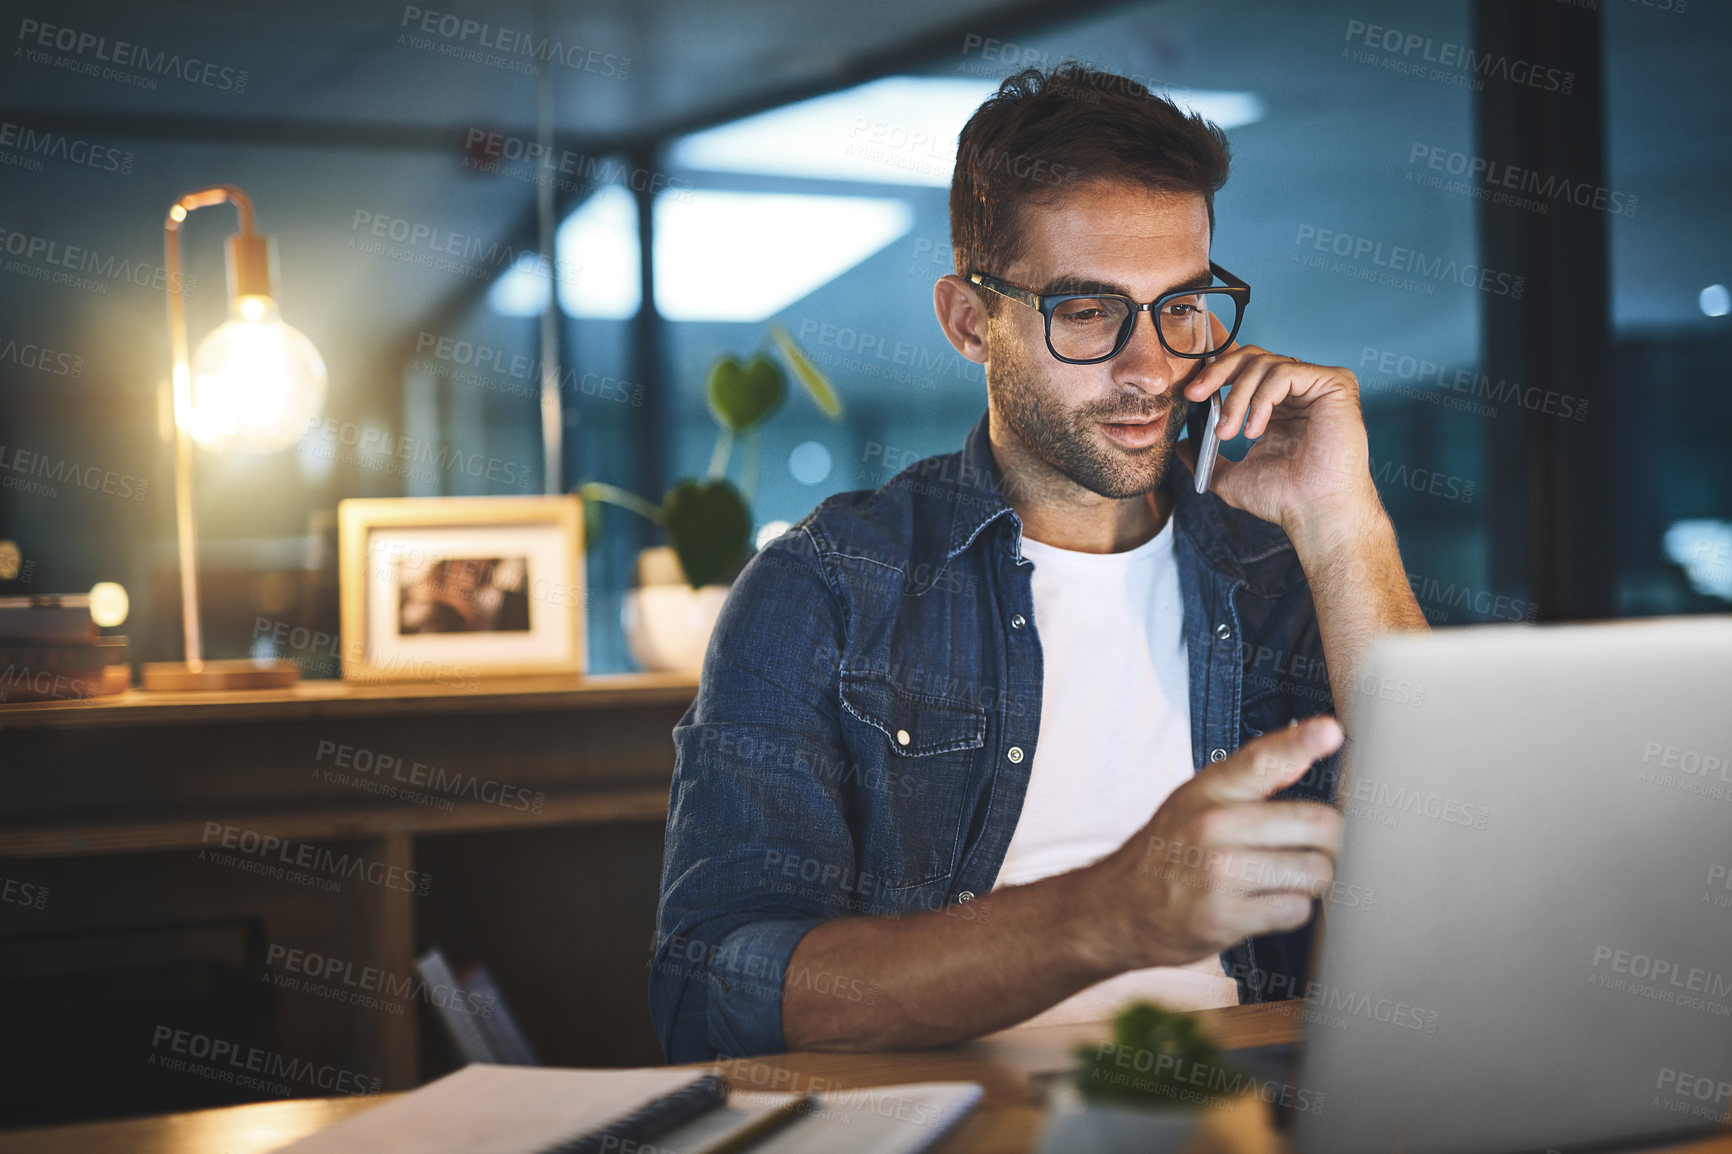 Buy stock photo Shot of a handsome young businessman talking on his cellphone while sitting at his desk in a modern office